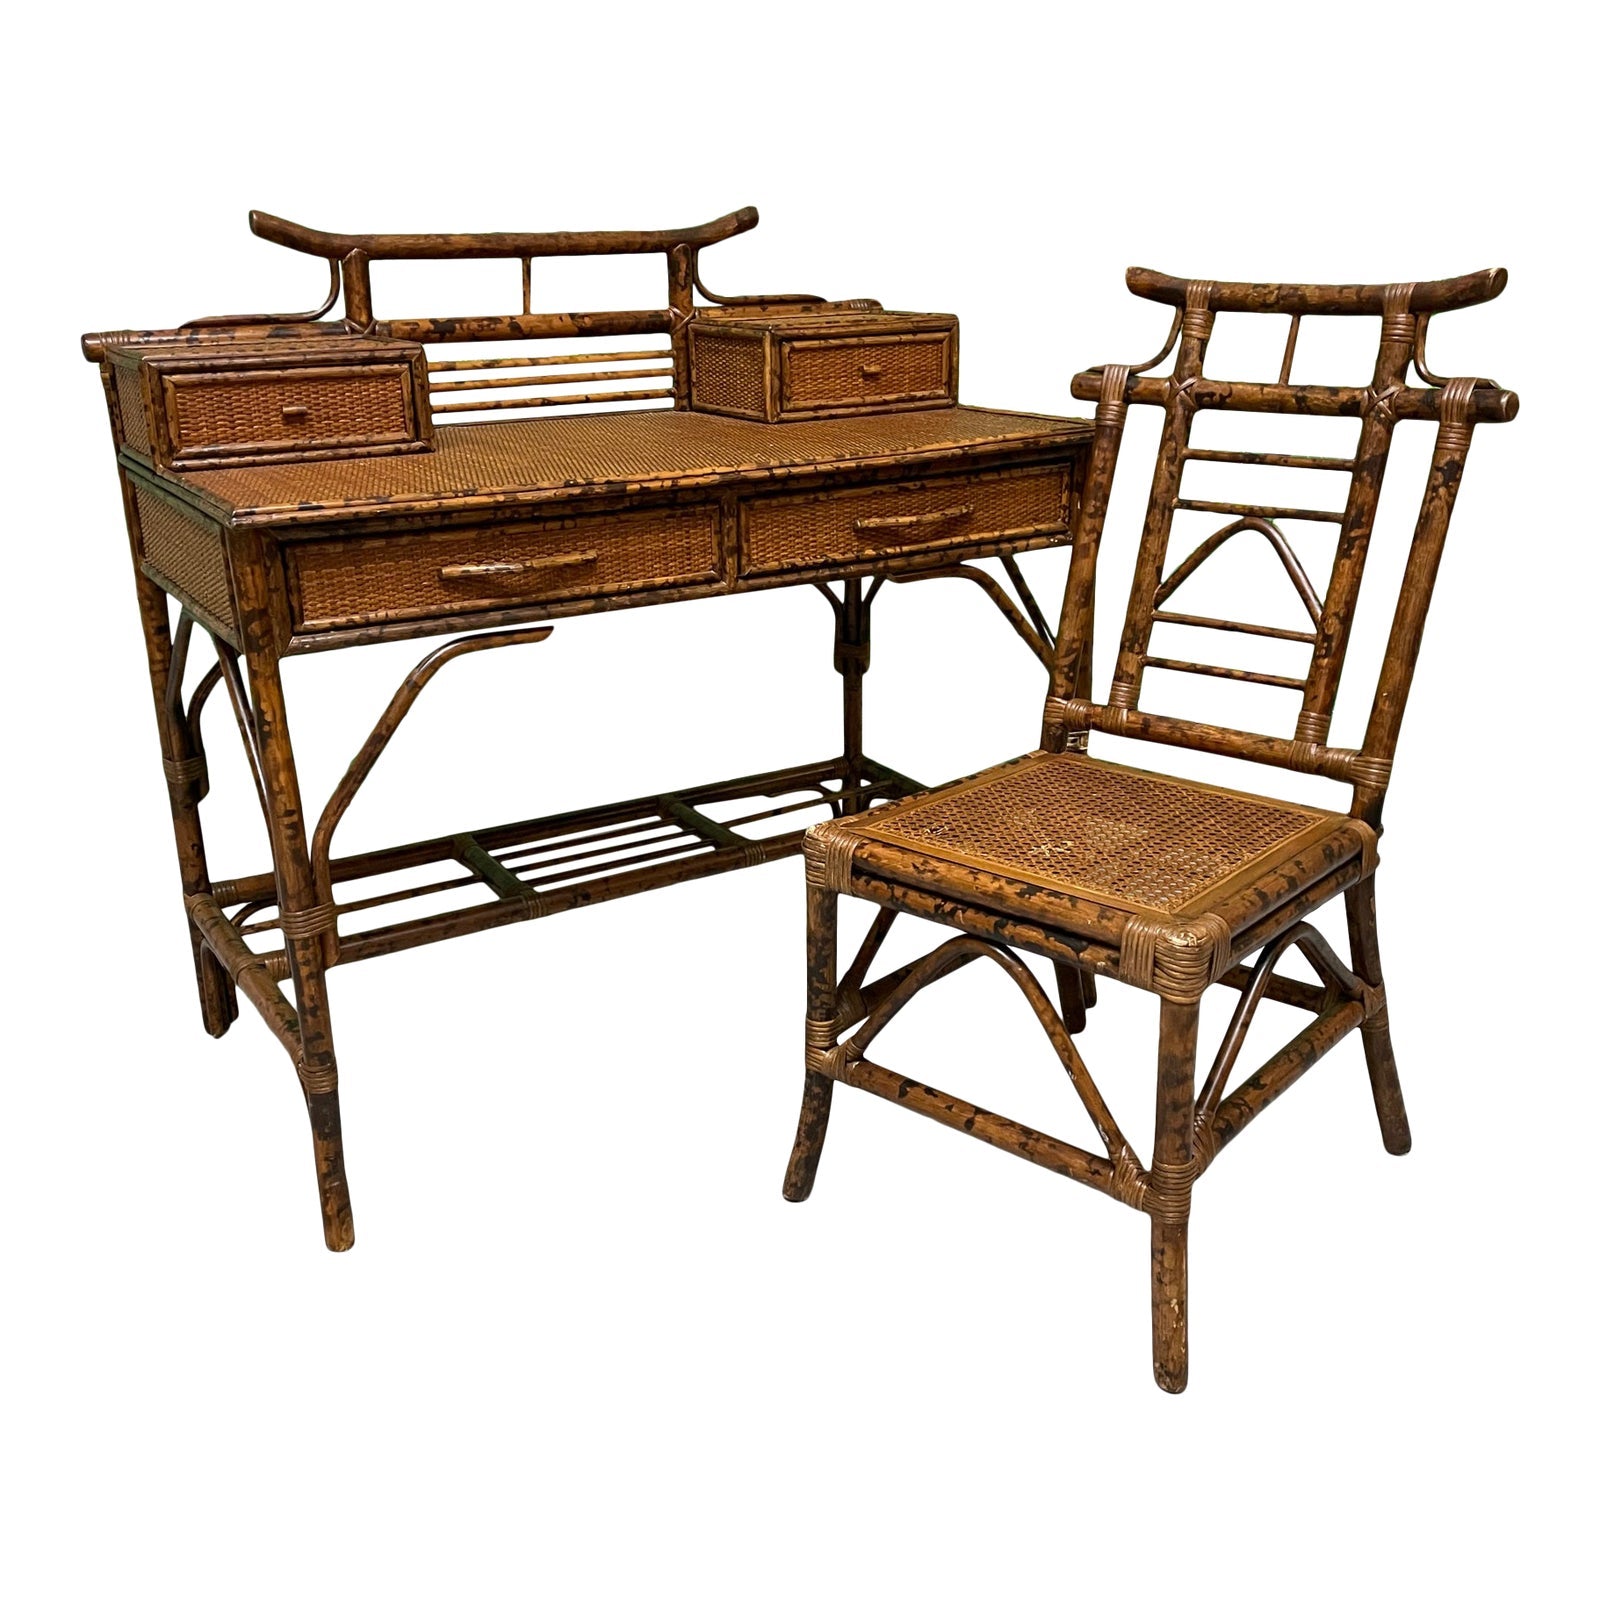 Bamboo and Rattan Pagoda Style Writing Desk and Chair